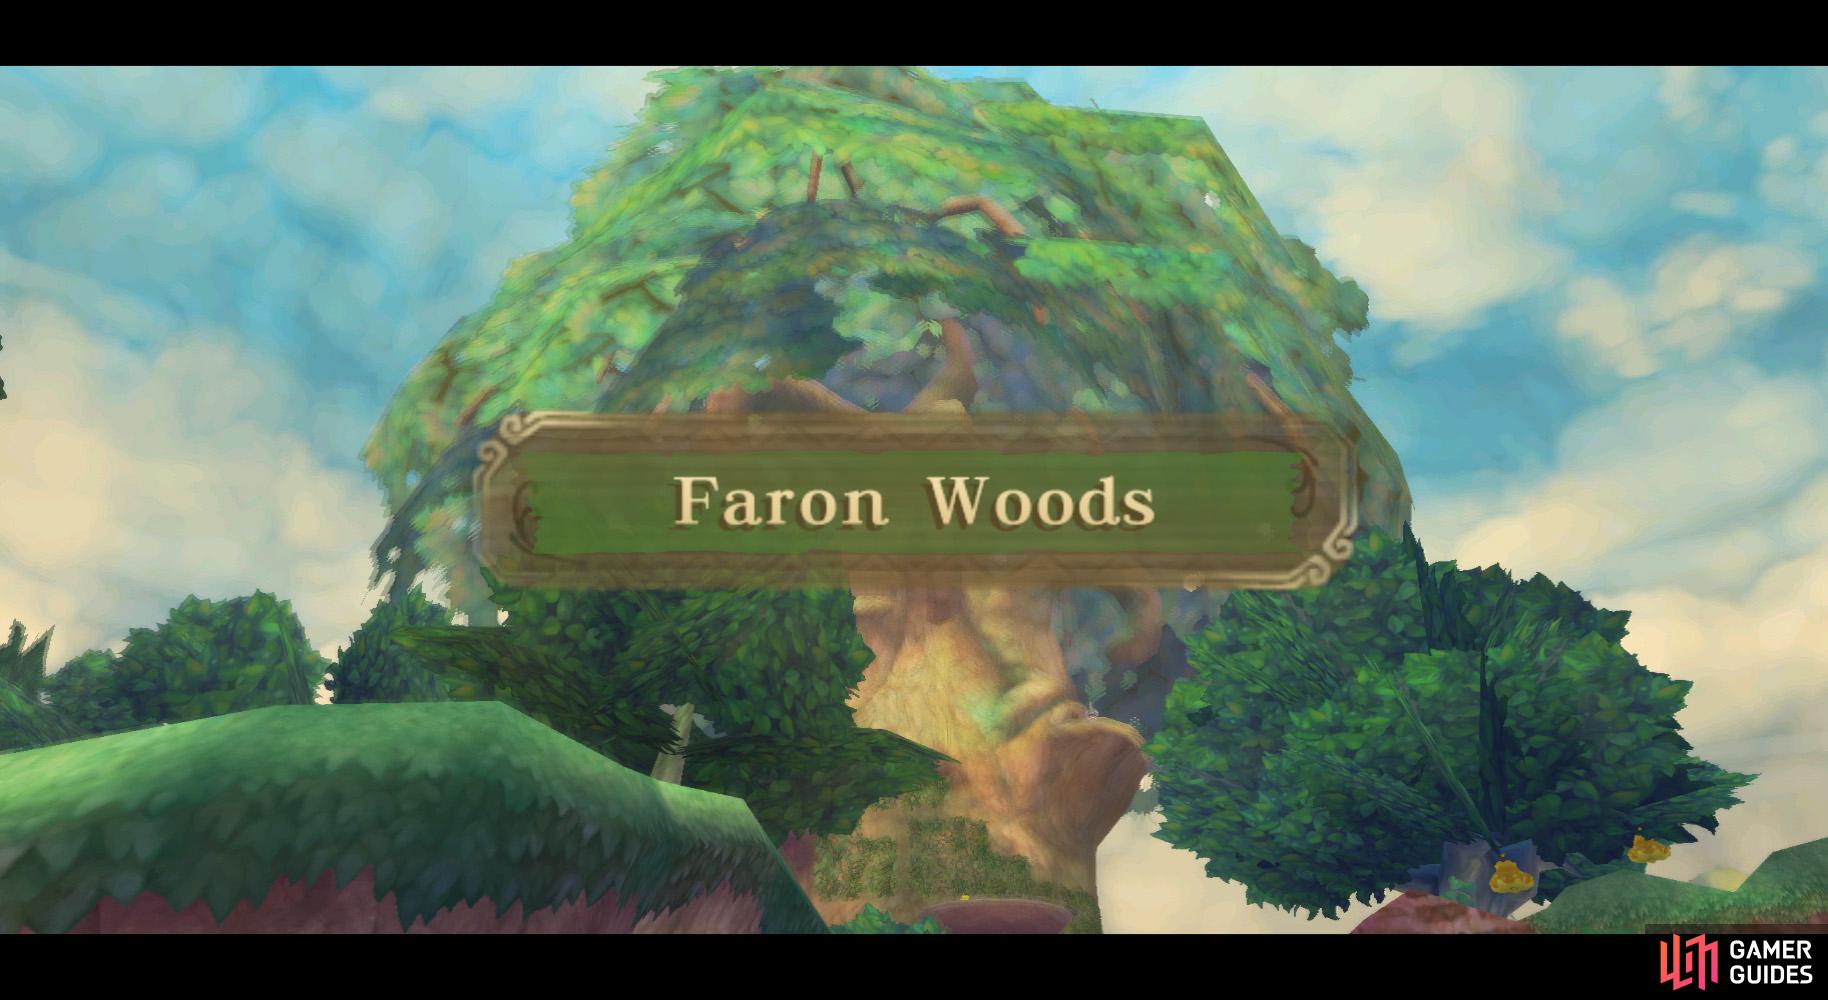 At the heart of the Faron Woods is the Great Tree.